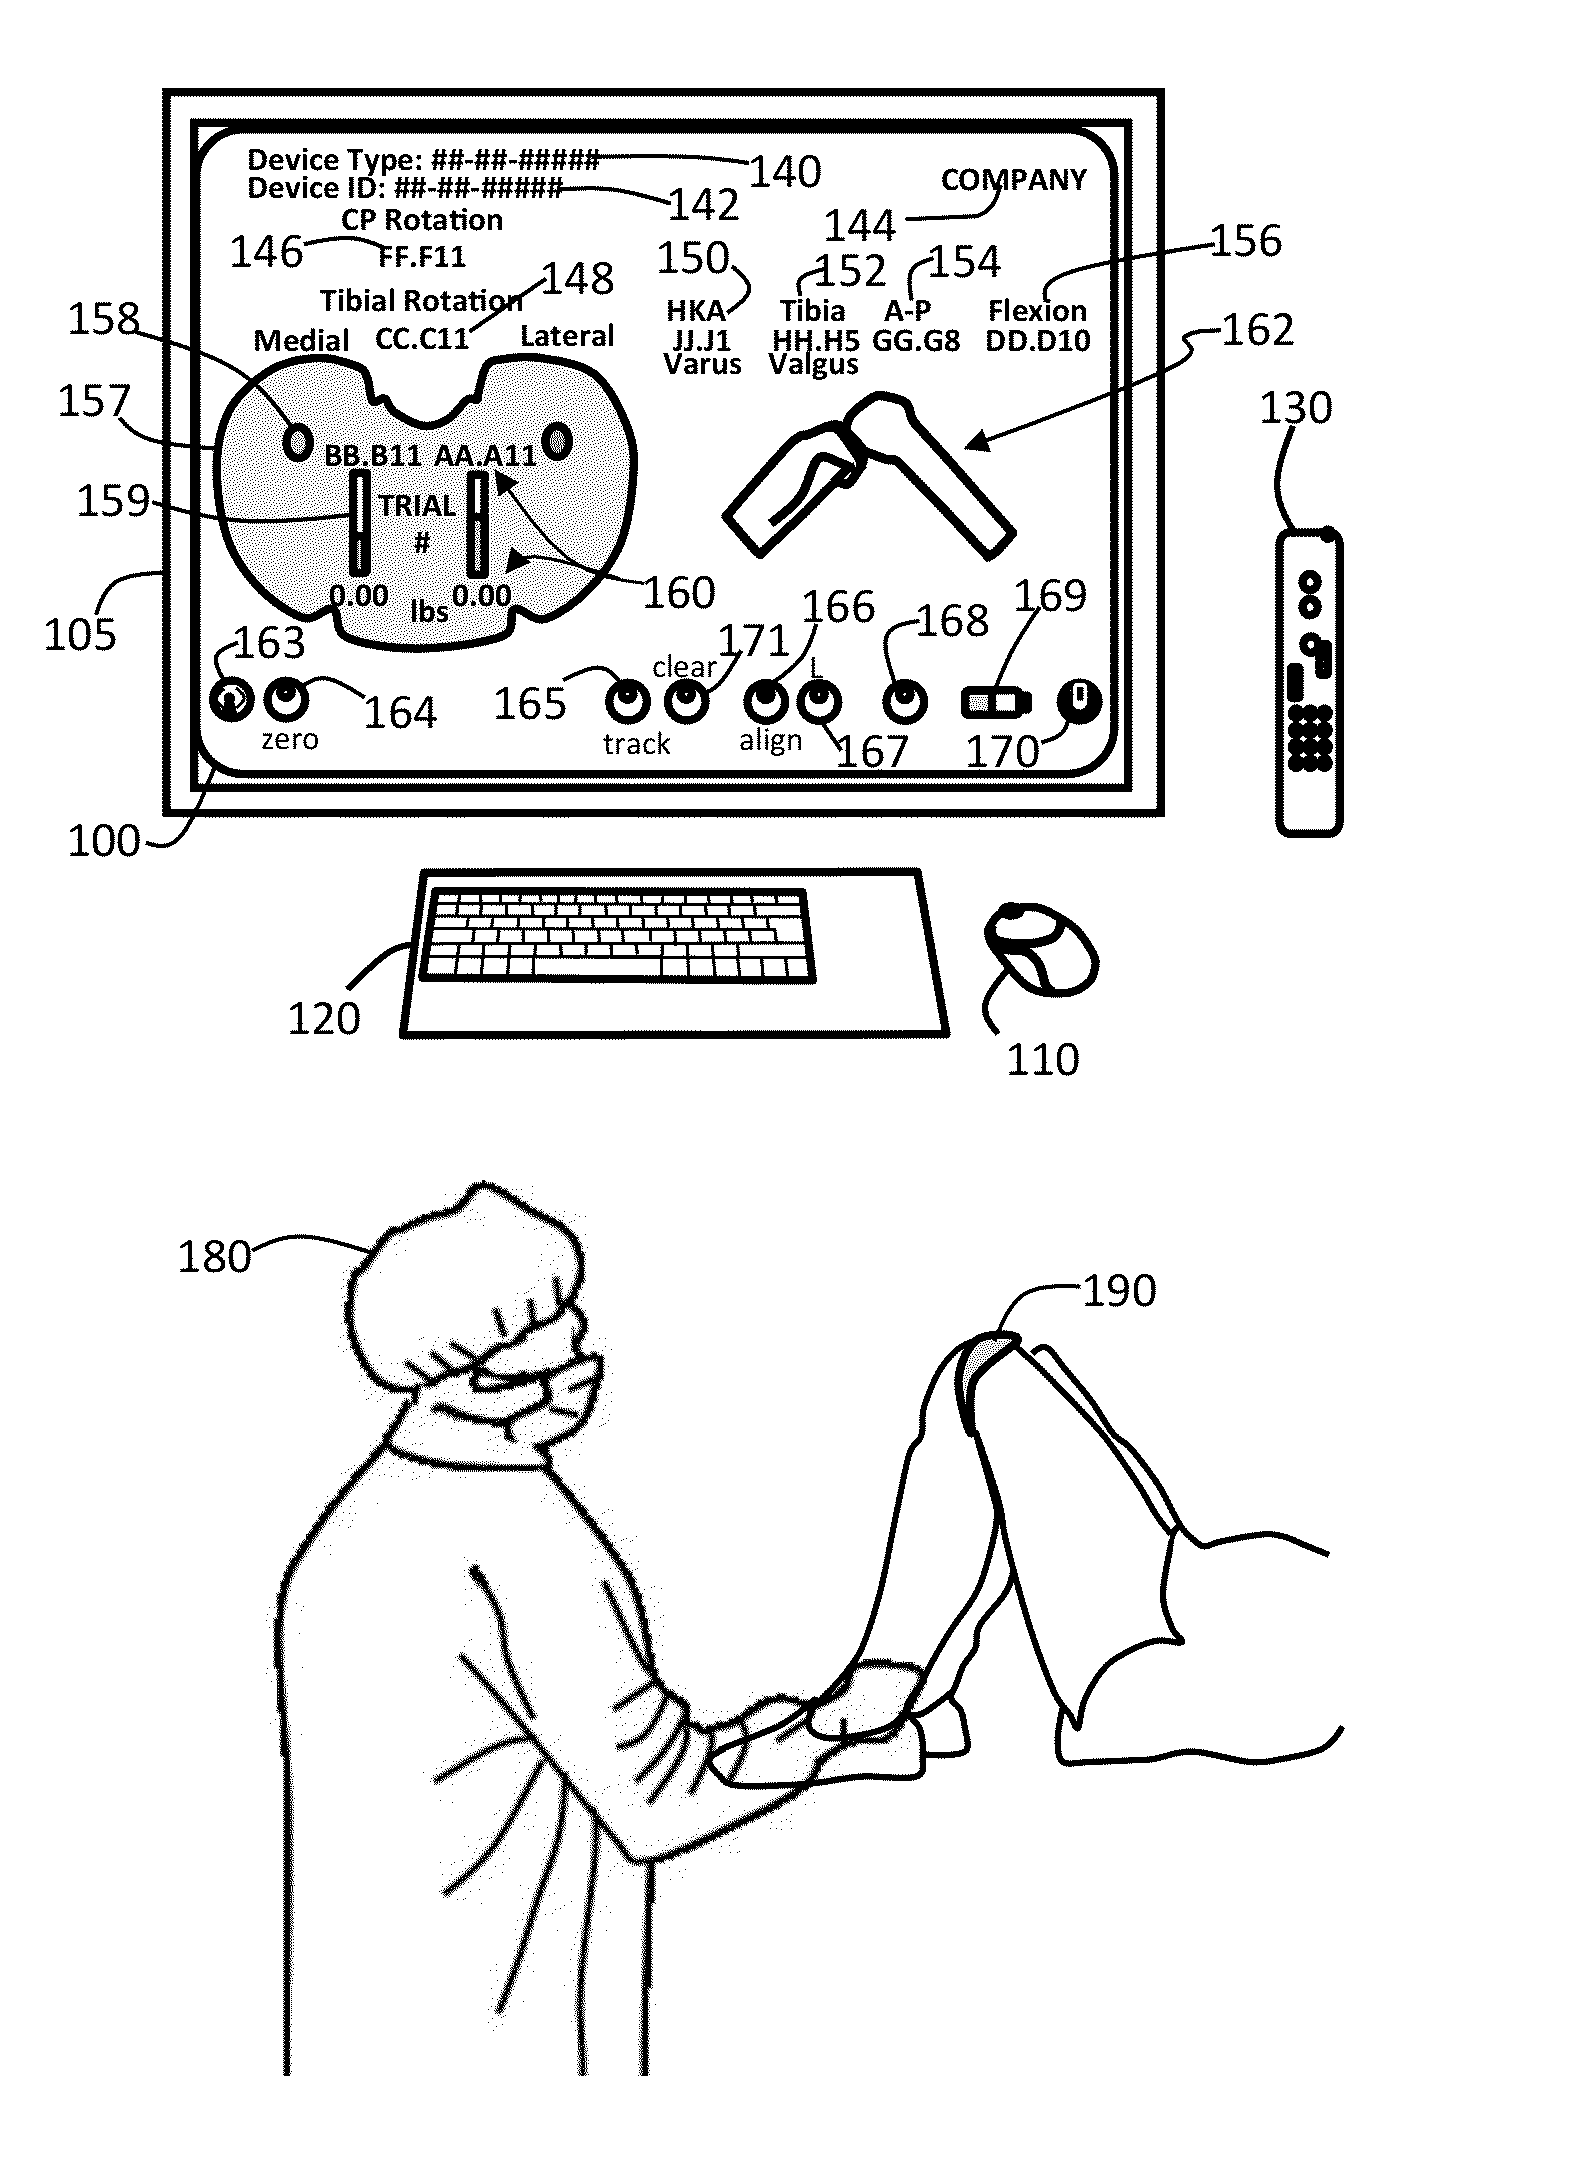 System for surgical information and feedback display